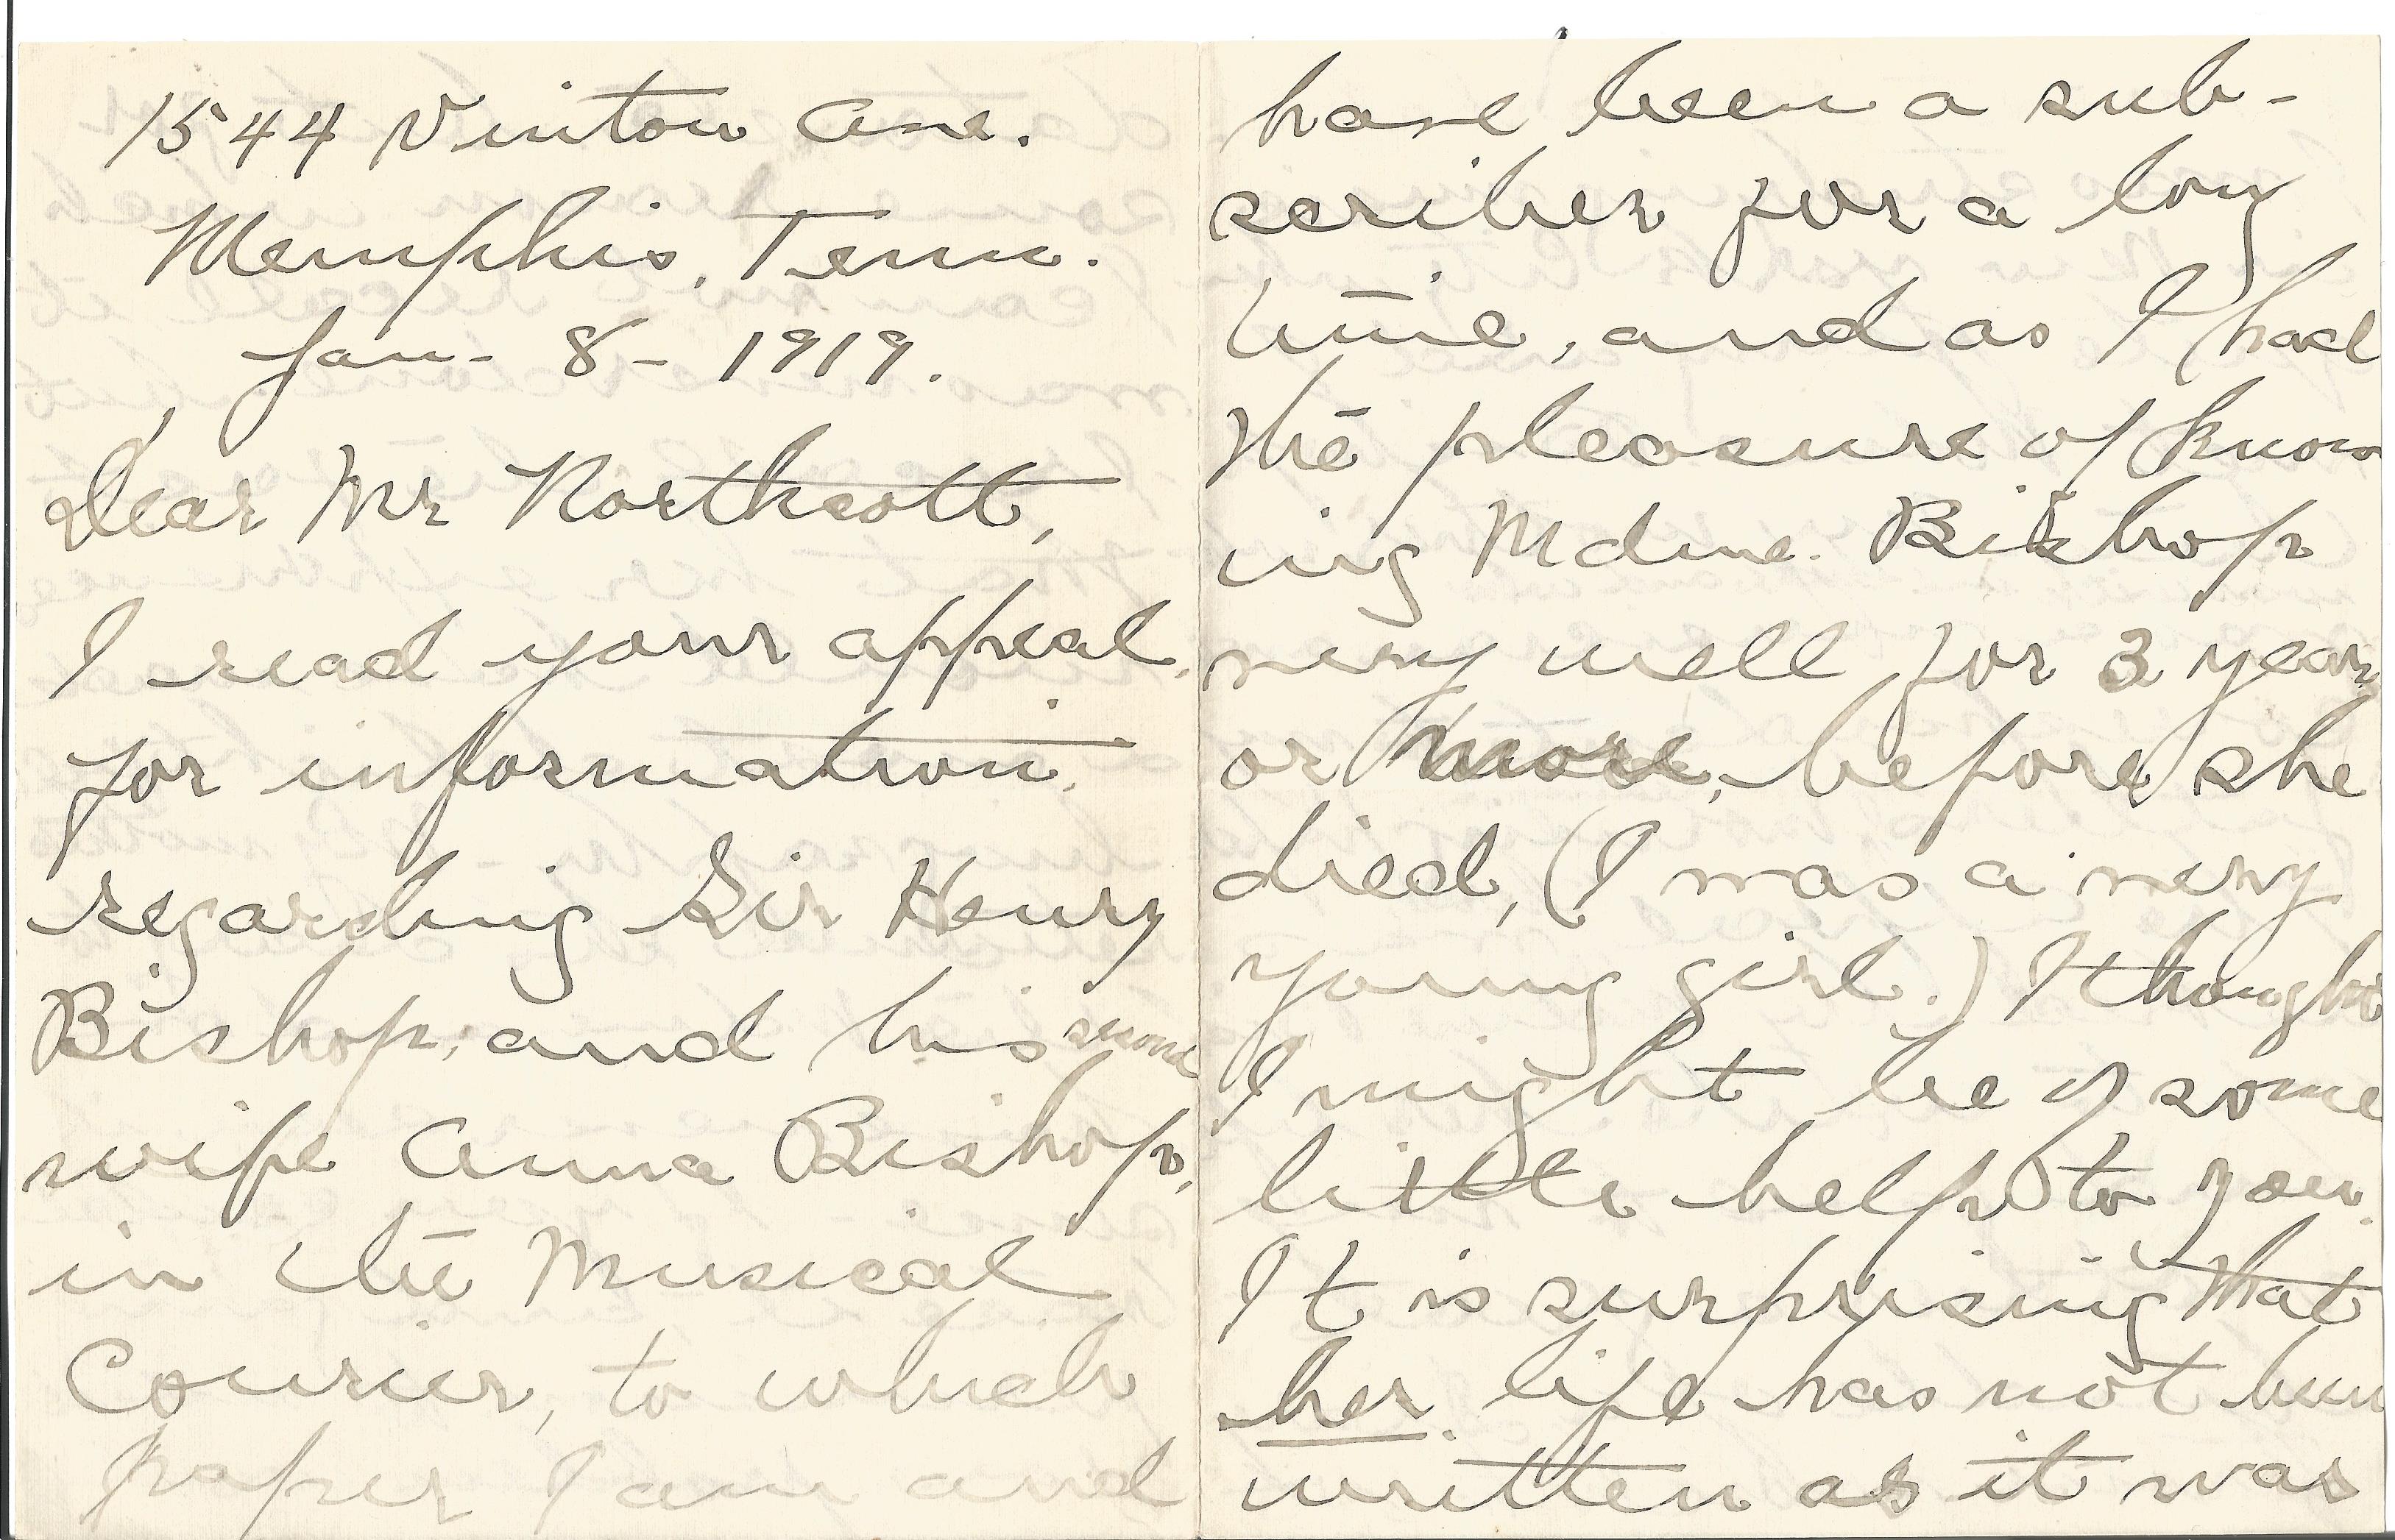 Caroline Keating Reed famous US pianist 8 page 1919 hand written letter with details on her - Image 4 of 5